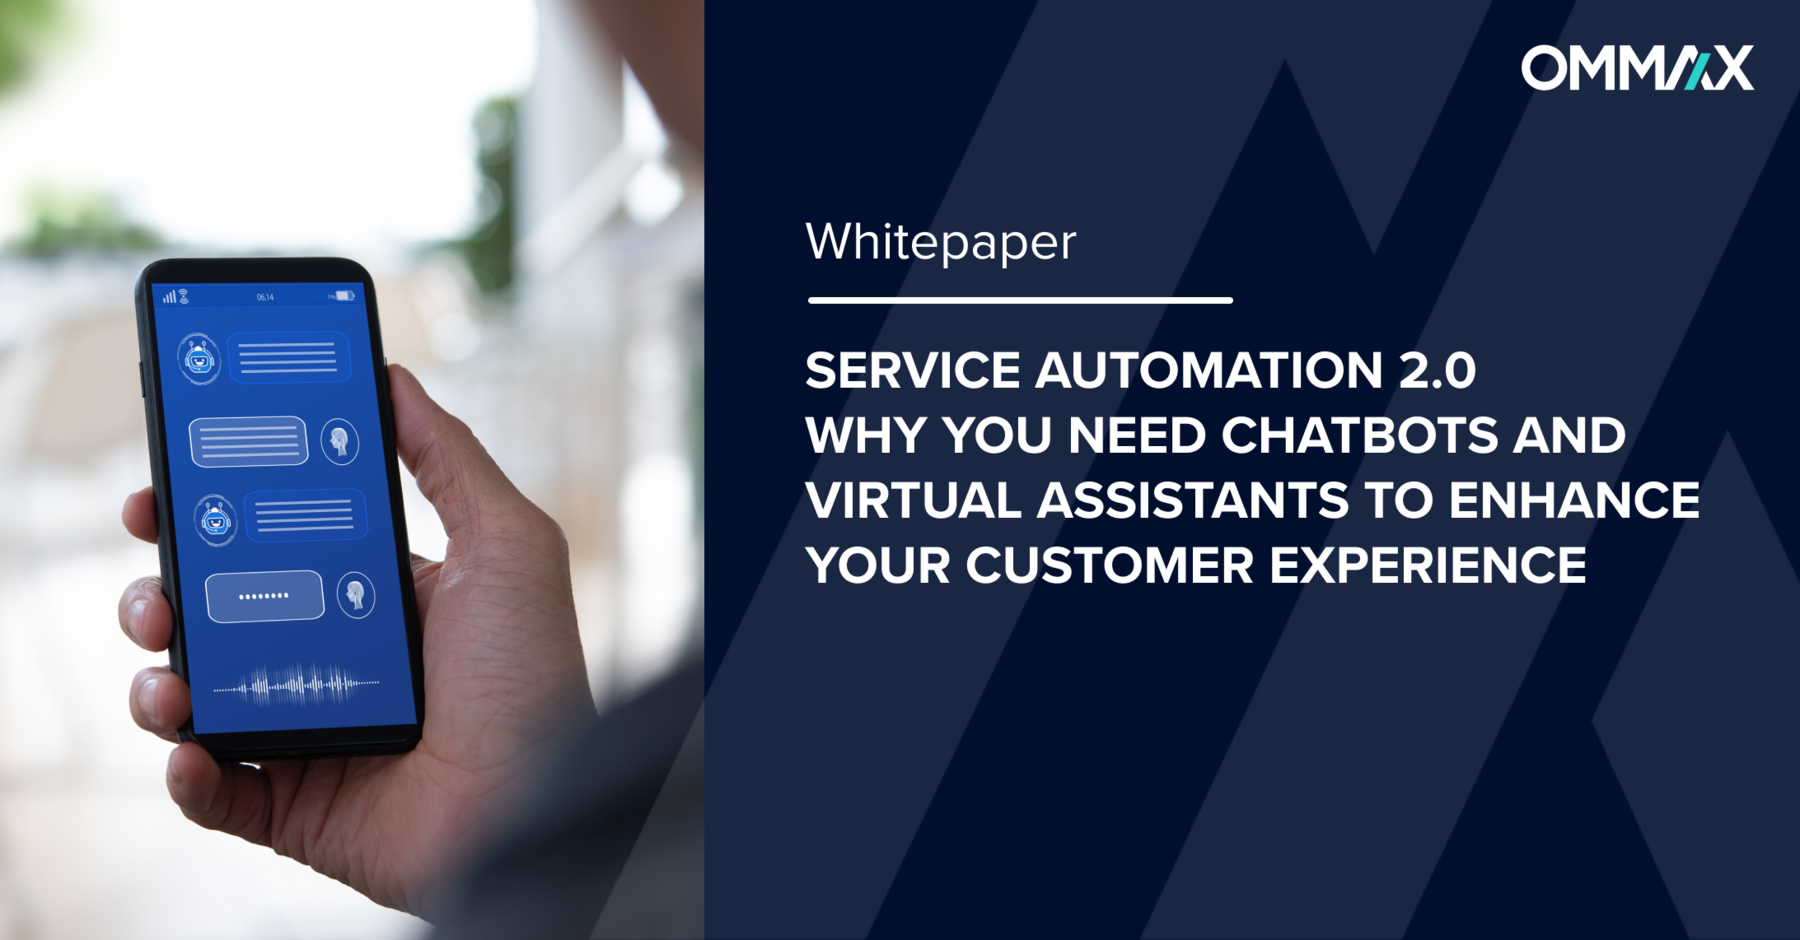 OMMAX whitepaper: Service Automation 2.0